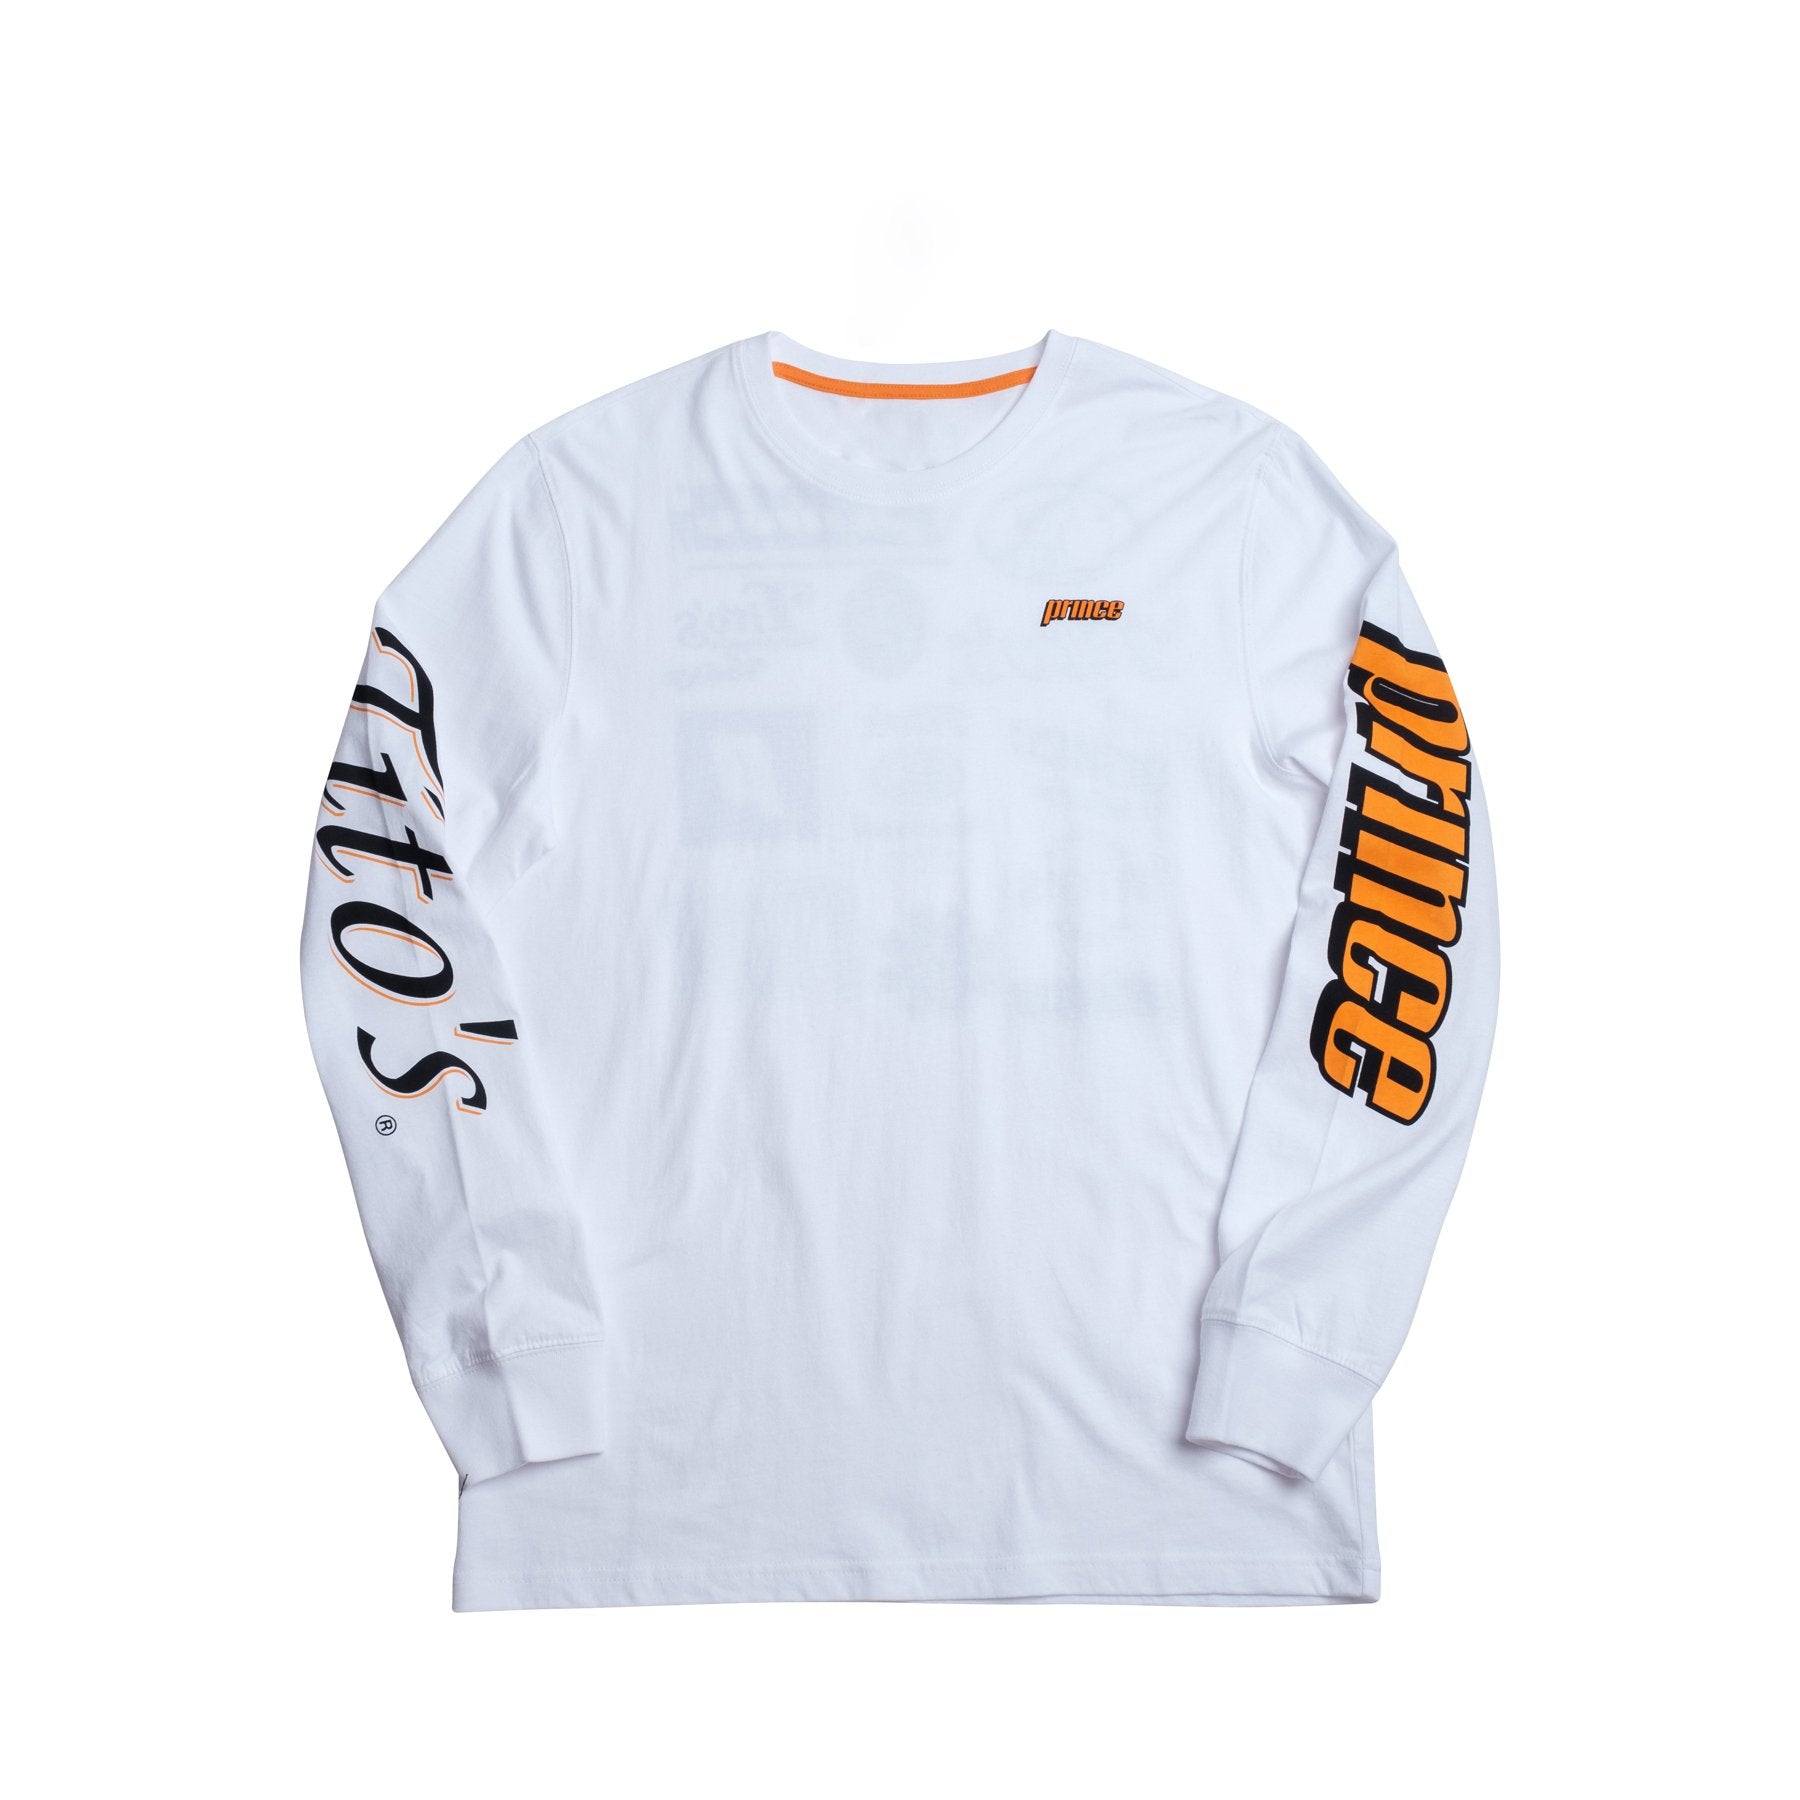 White long sleeve with prince logo on left chest in orange, prince logo on left sleeve in orange, and tito's logo on right sleeve in black